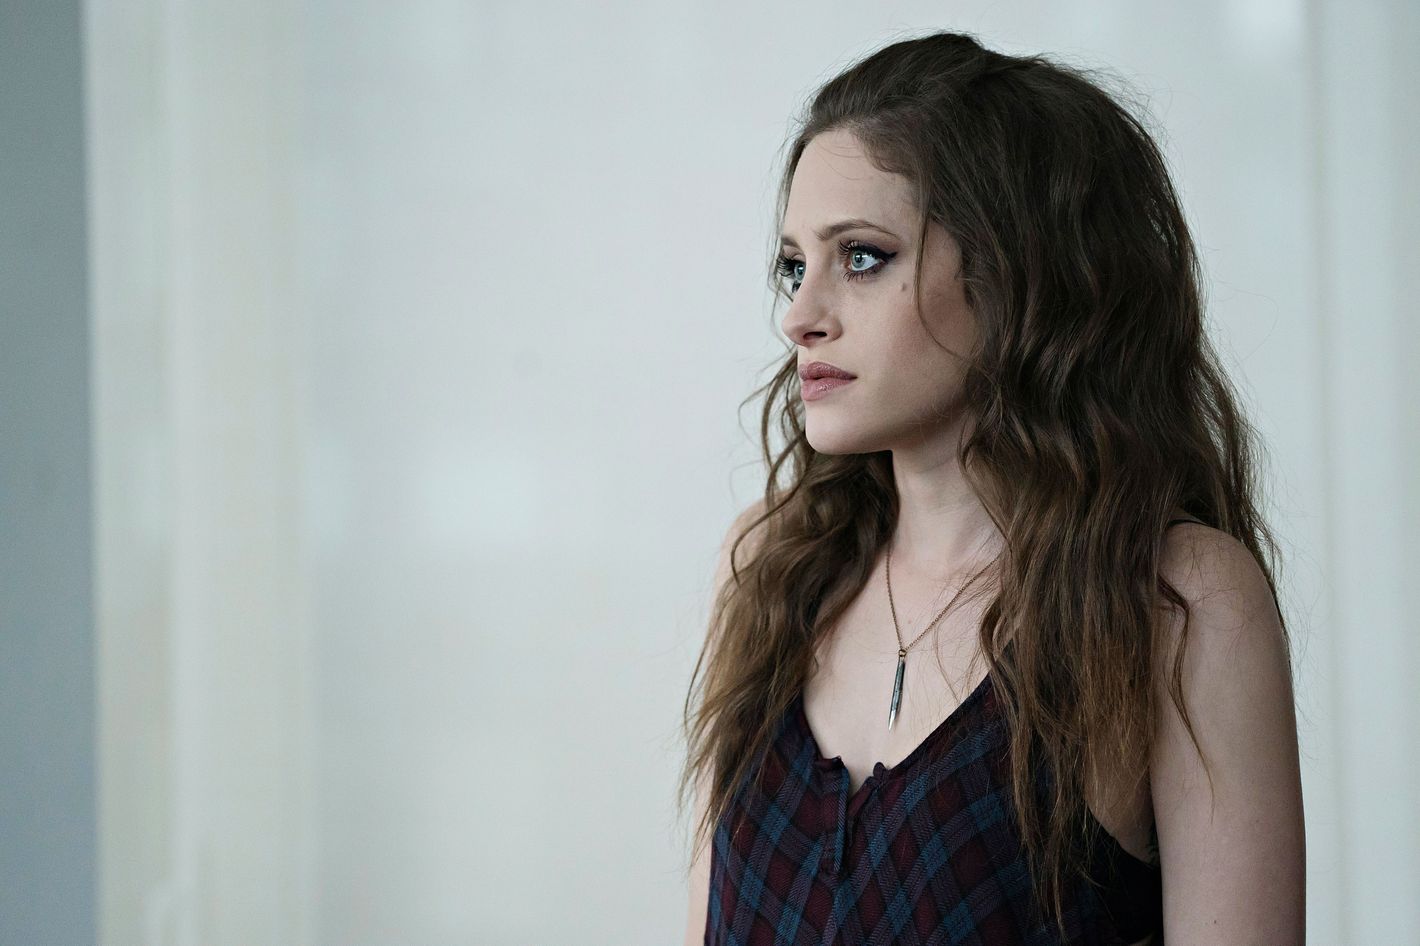 Mr. Robot Season 2 Episode 6 Review: eps2.4_m4ster-s1ave.aes - TV Fanatic